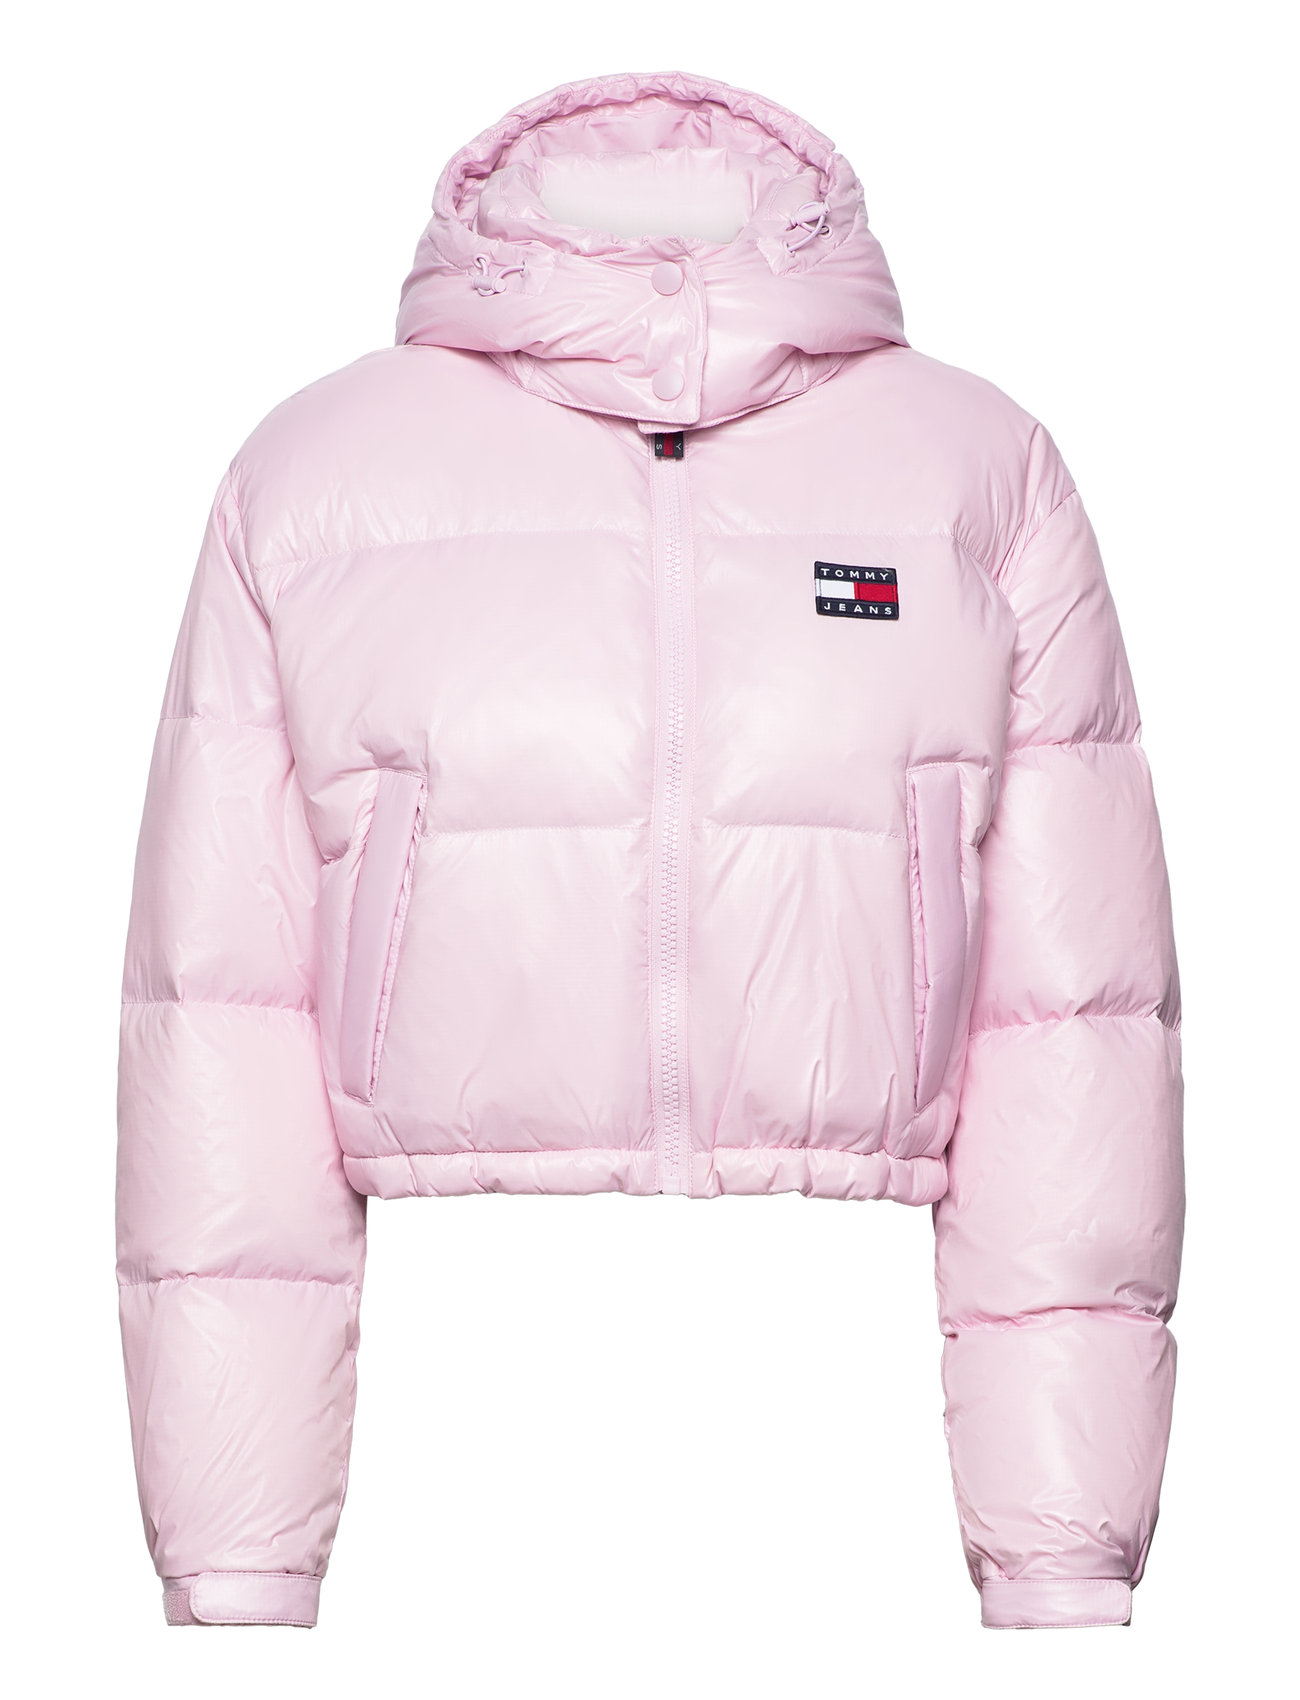 Tommy Jeans Tjw Crp at Tommy Jeans online Down- Puffer 126.45 padded easy Alaska €. Boozt.com. Fast Buy and returns & - jackets delivery from